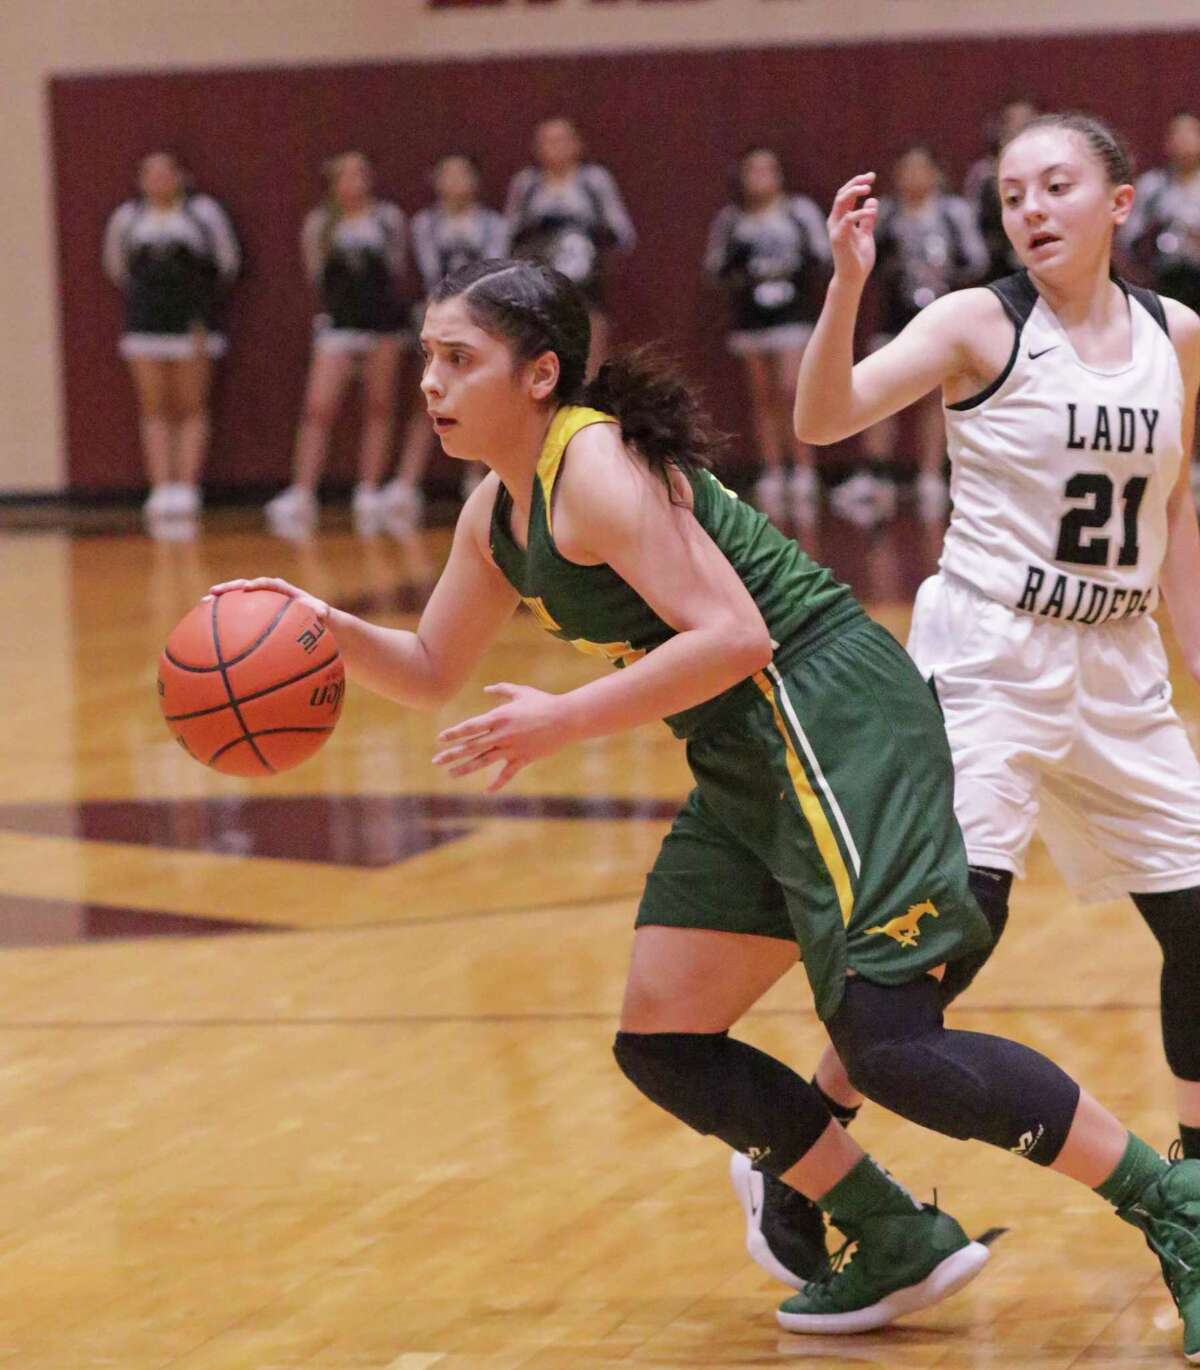 Ashley Pena and Nixon were eliminated during the first round of the girls' basketball playoffs on Tuesday at Zapata losing 37-32 to PSJA North.